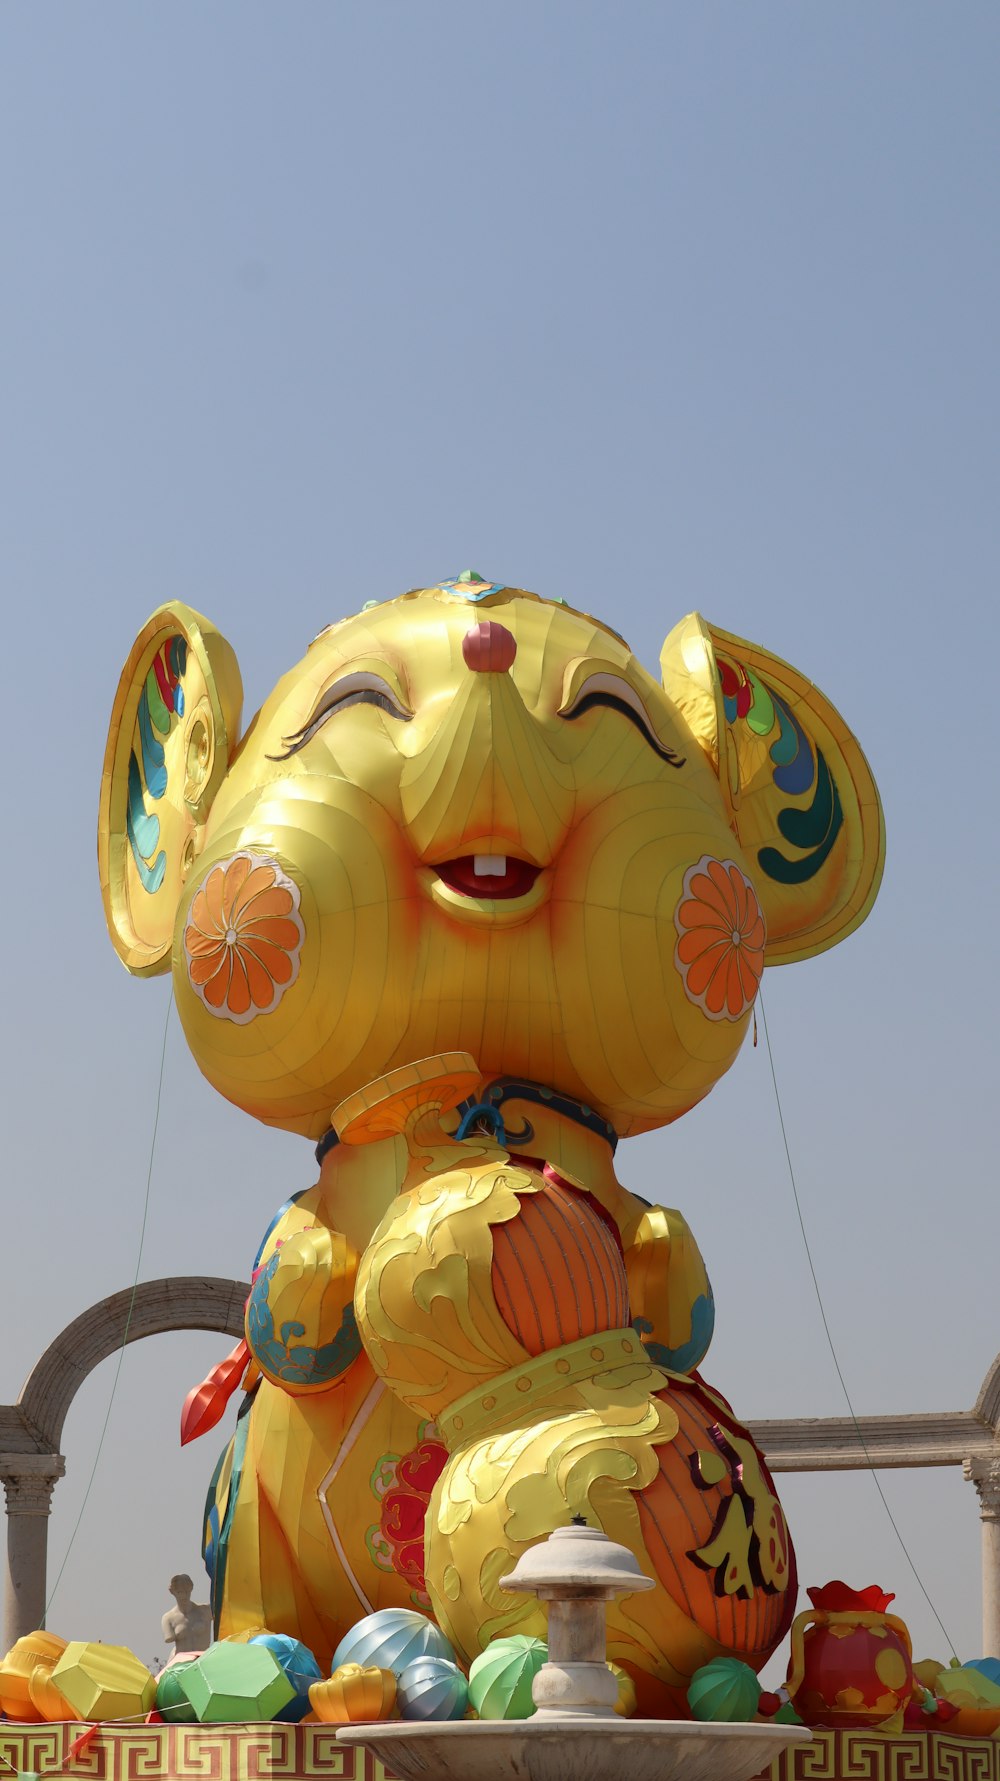 yellow and red dragon balloon